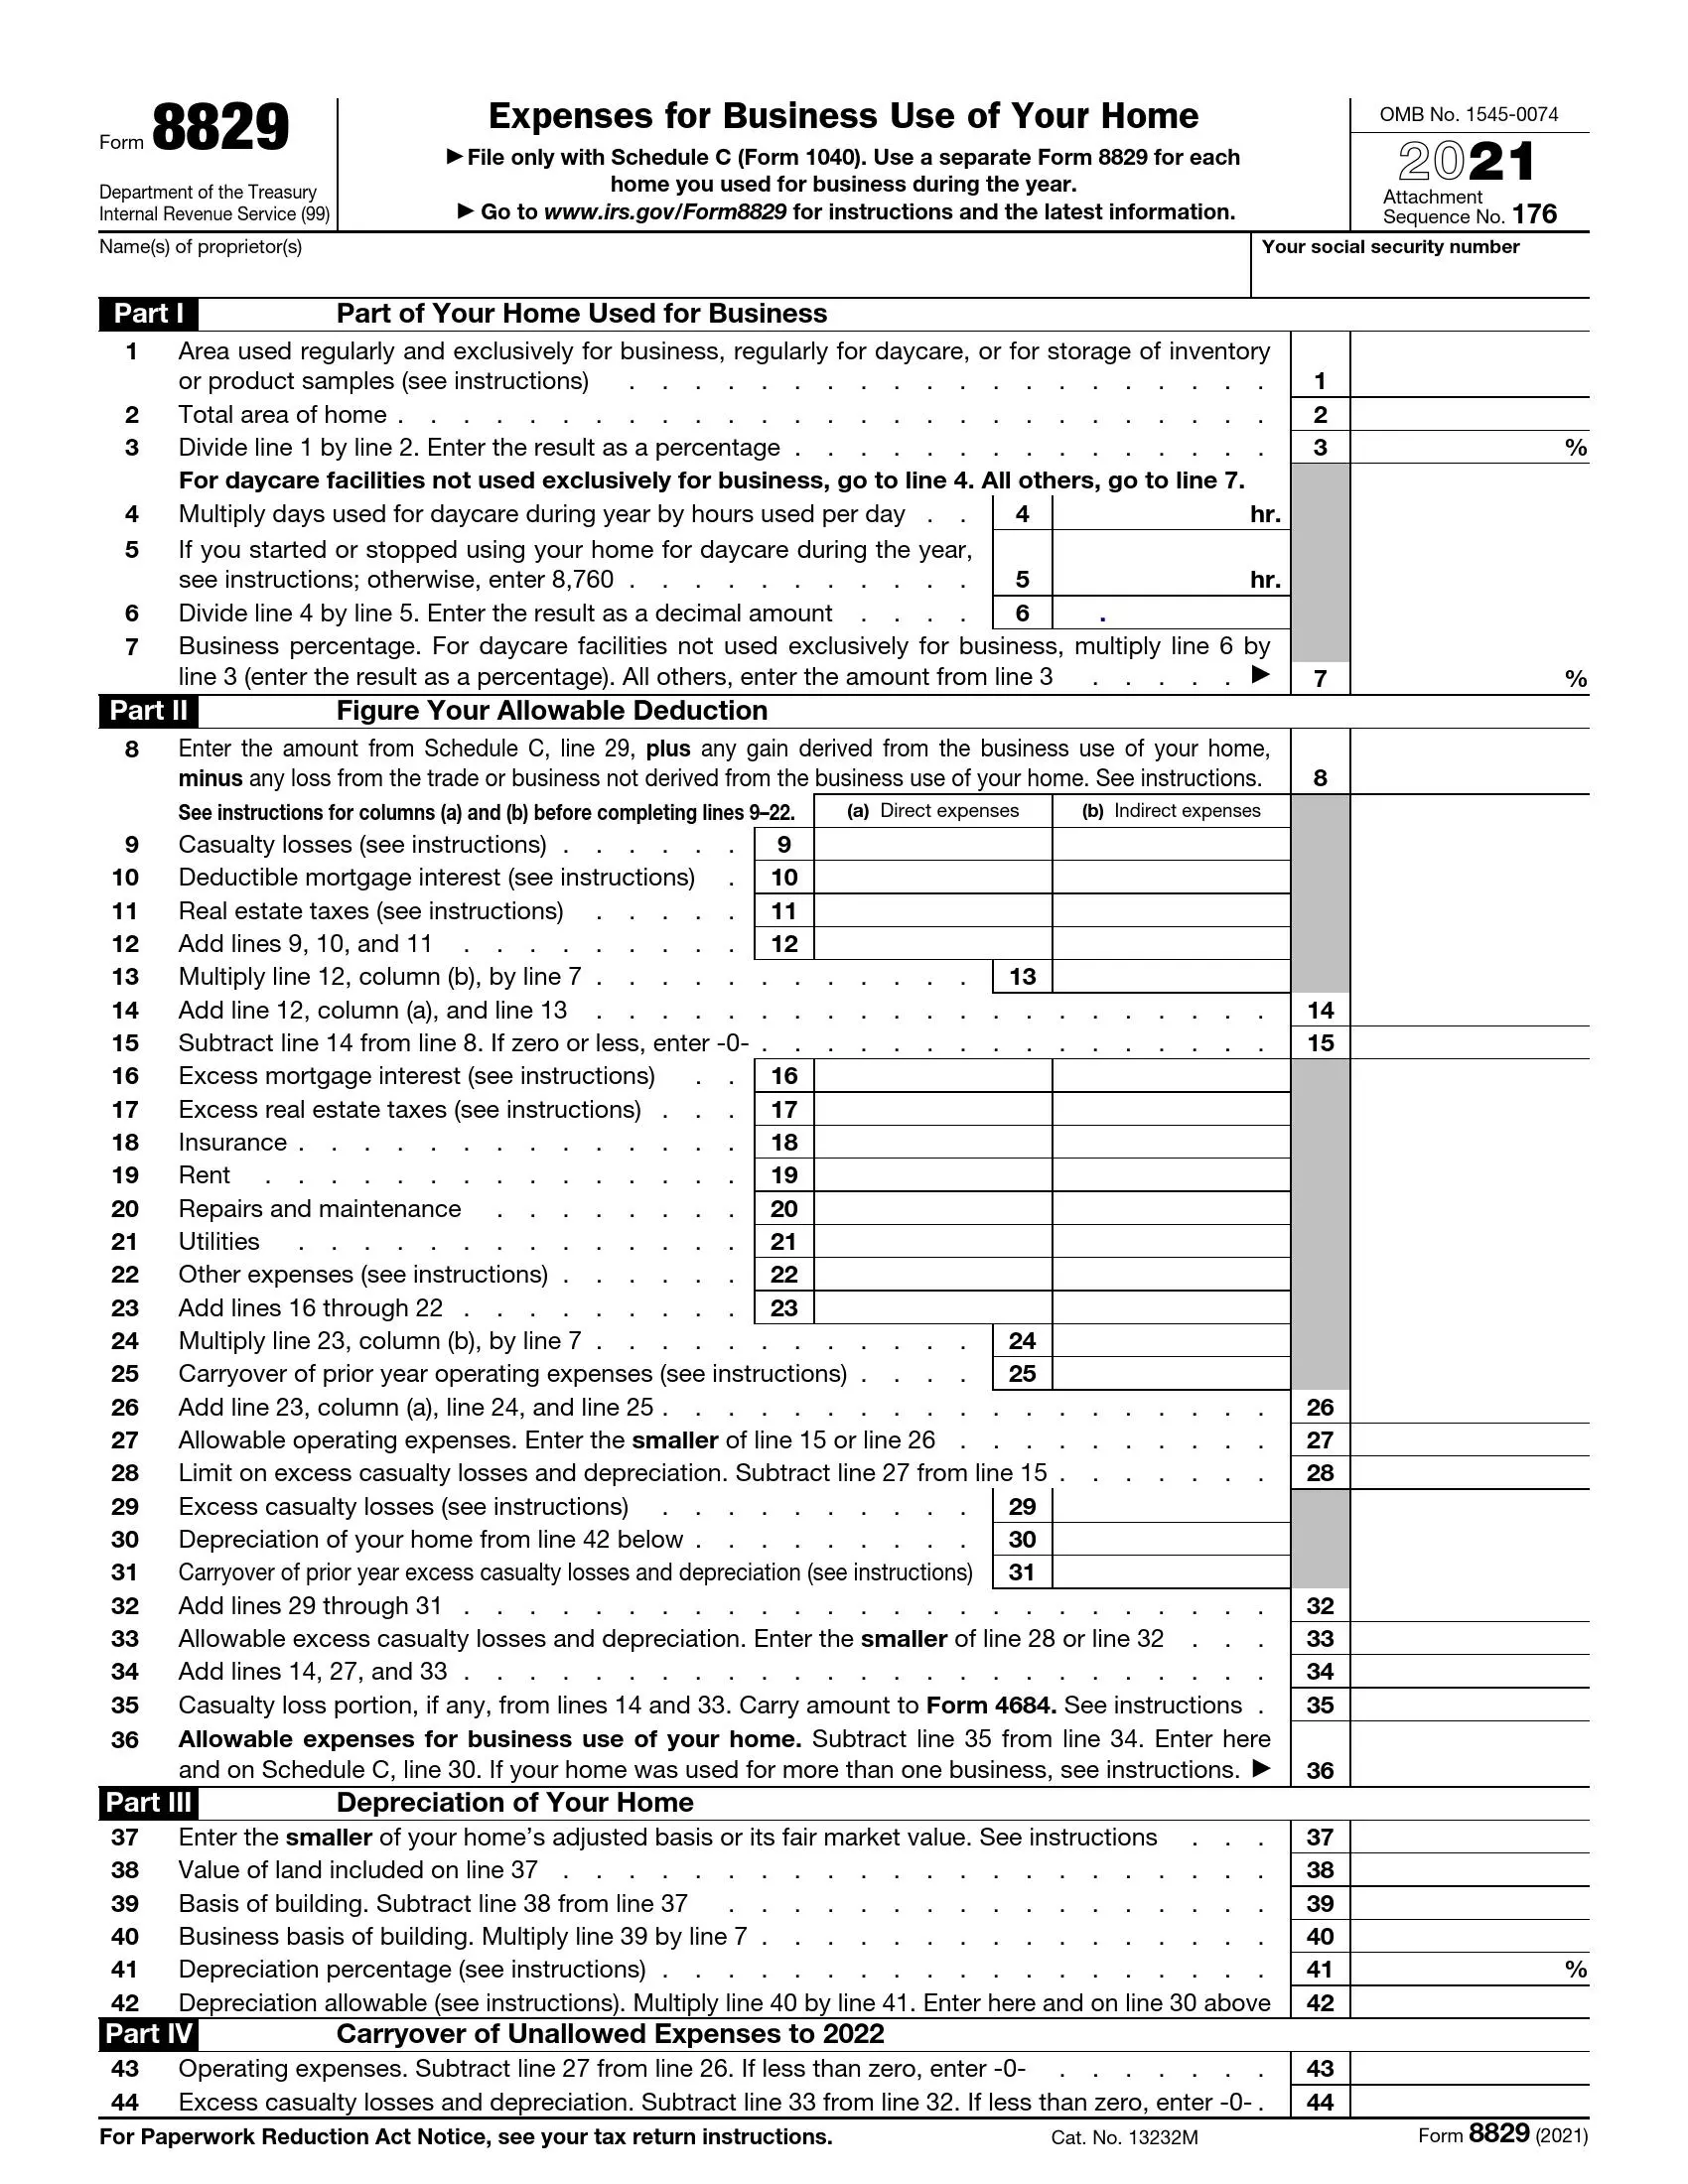 irs form 8829 2021 preview